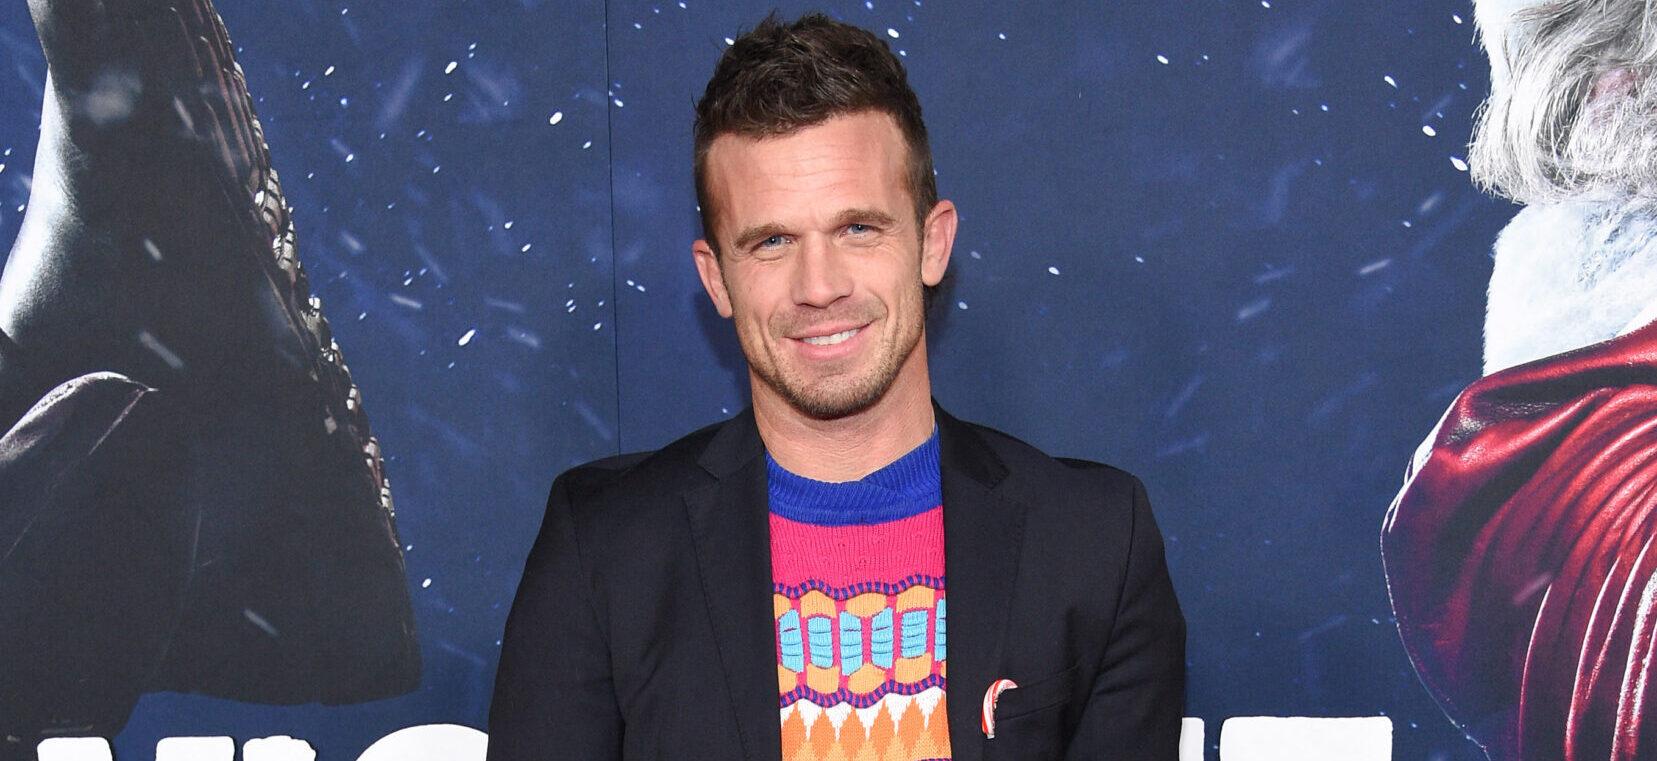 'Twilight' Star Cam Gigandet To Be Evicted From His Home, Allegedly Owes $21,000 In Back Rent